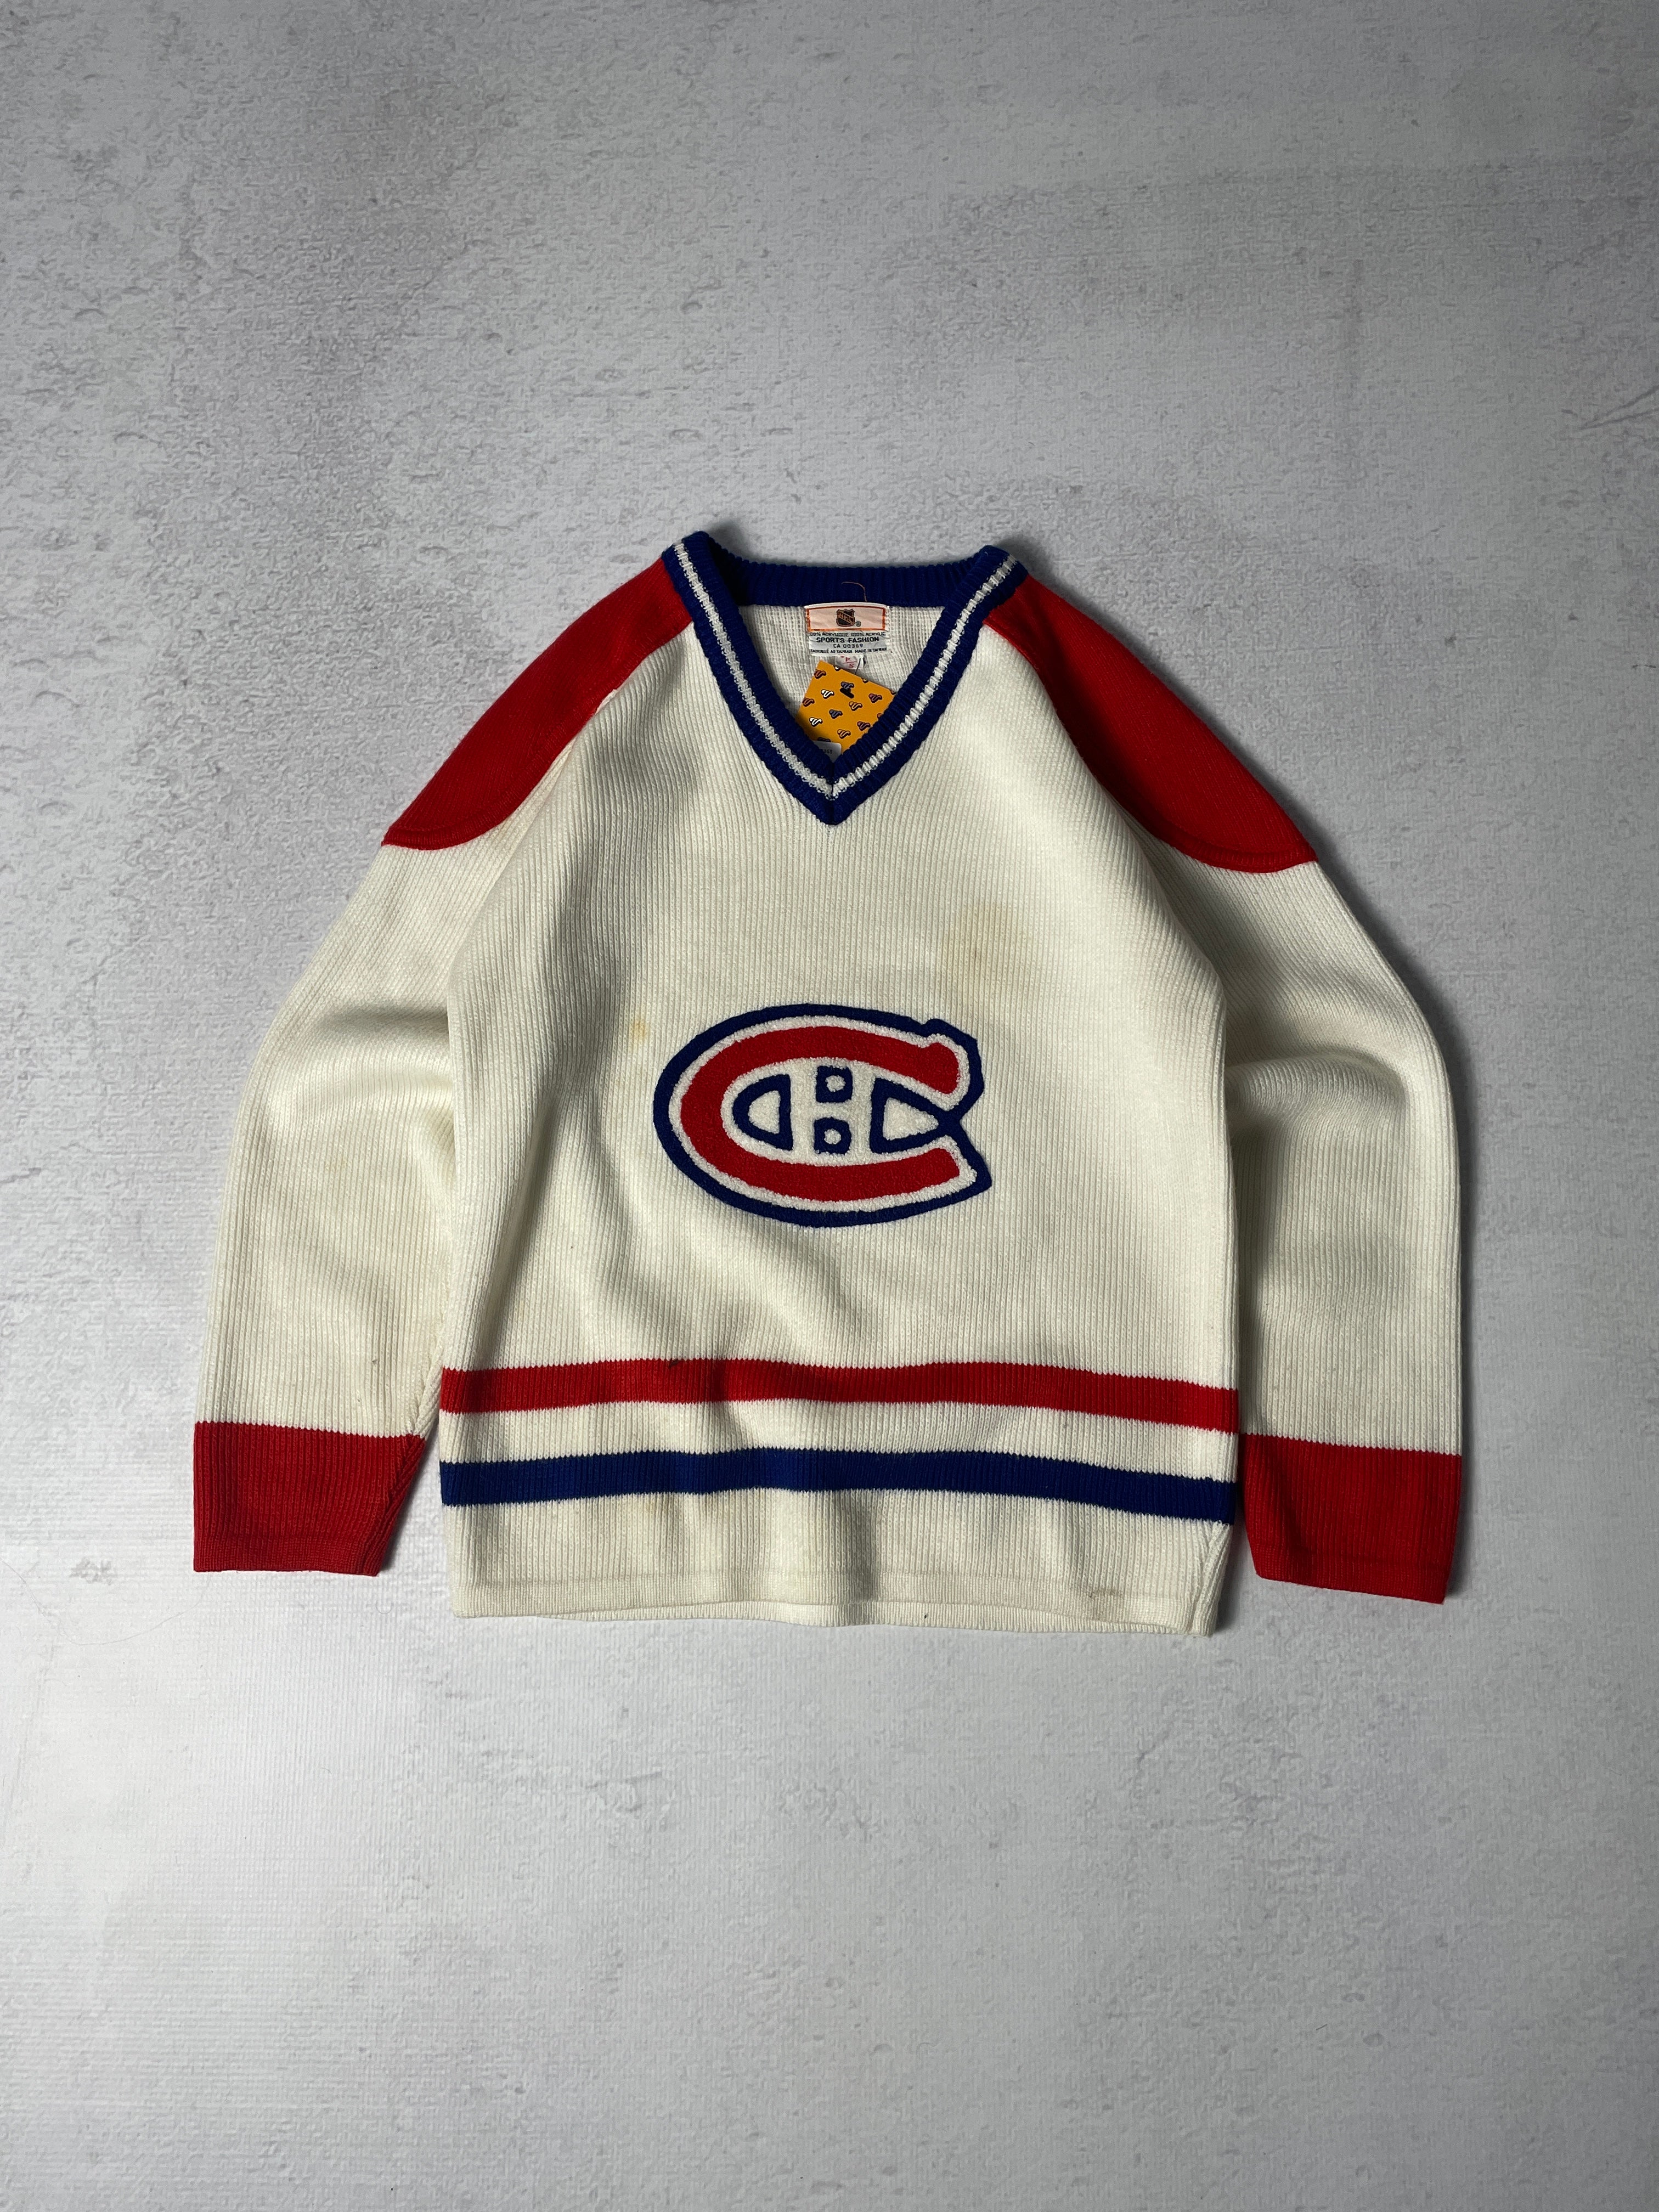 Vintage NHL Montreal Canadiens Knitted Sweater - Men's Small